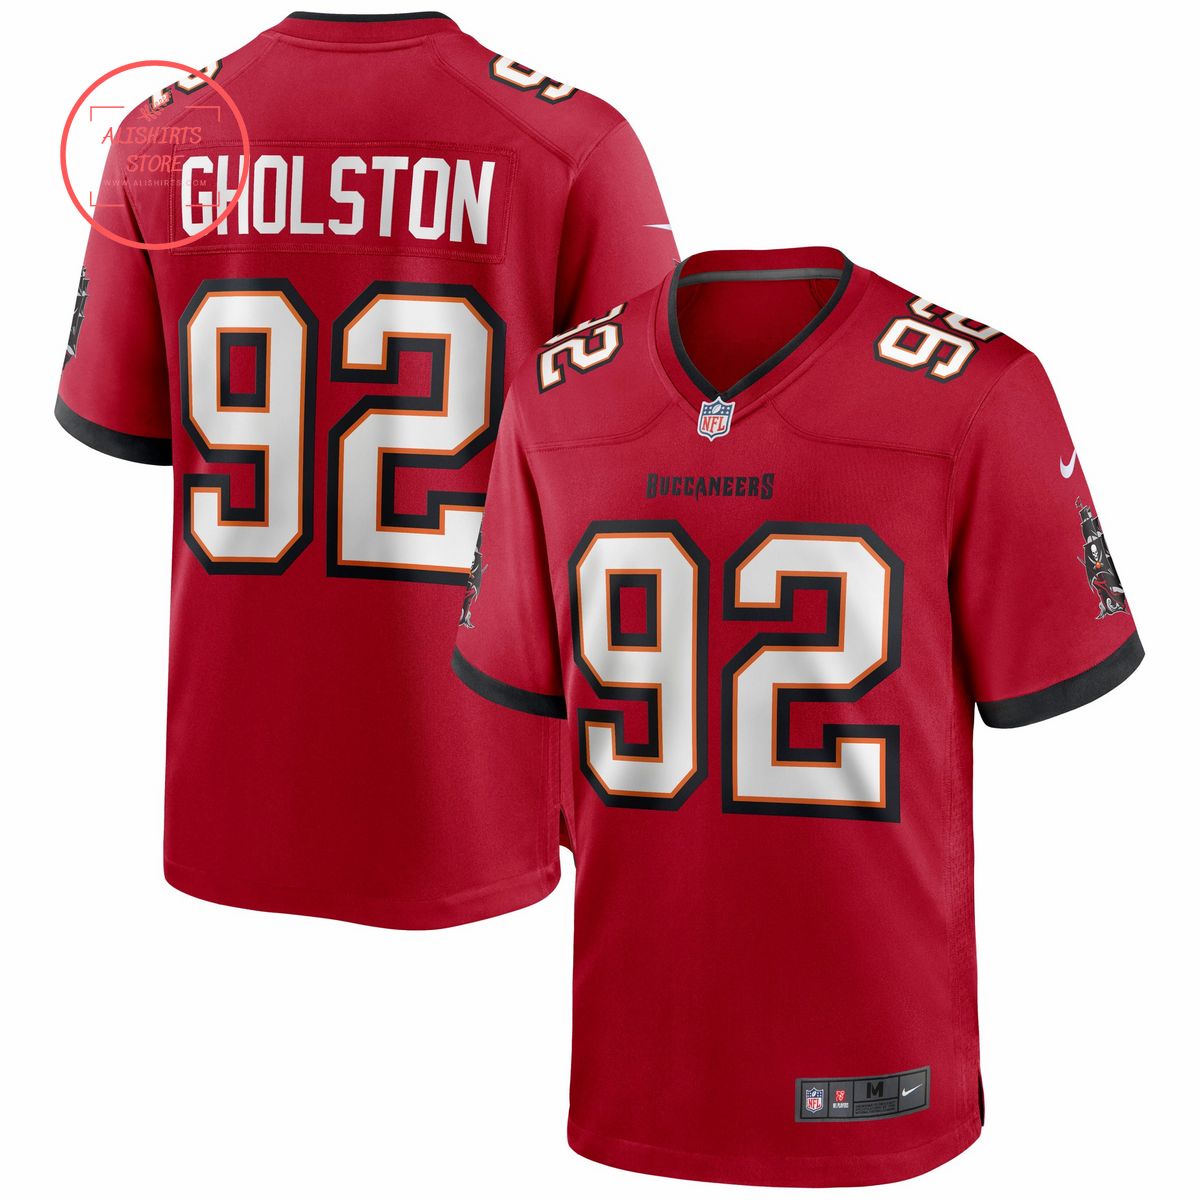 William Gholston Tampa Bay Buccaneers Nike Game Red Jersey